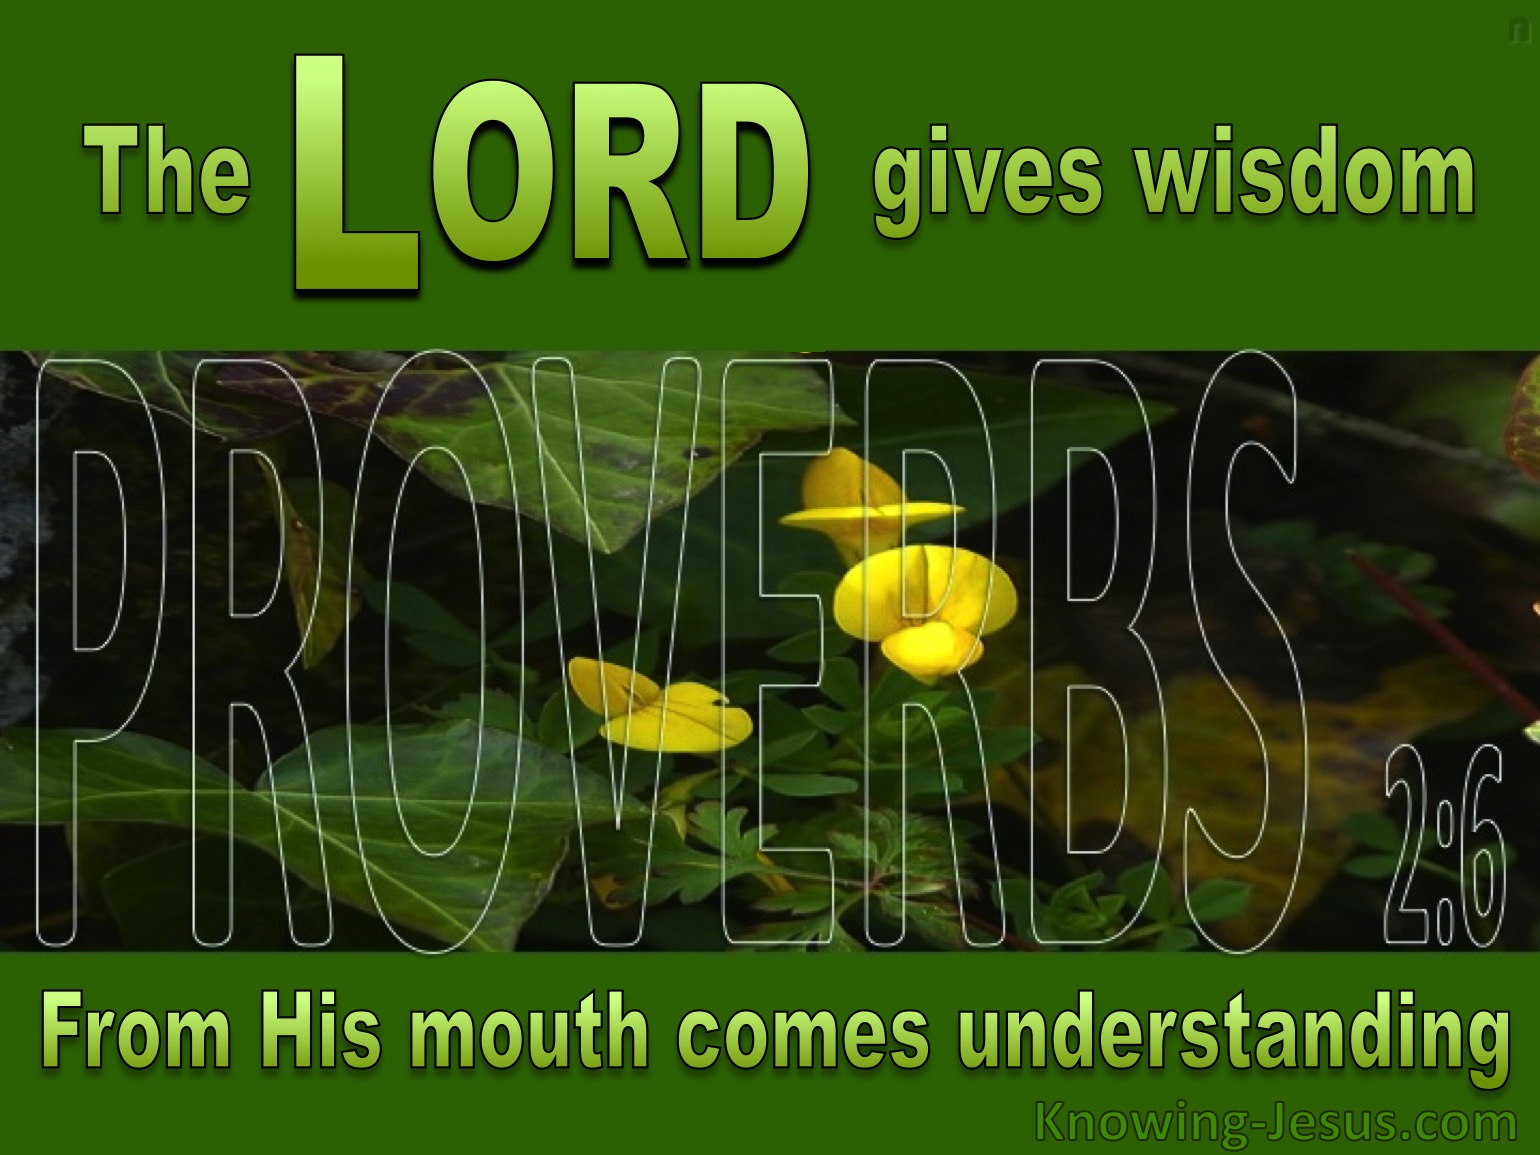 What Does Proverbs 2:6 Mean?